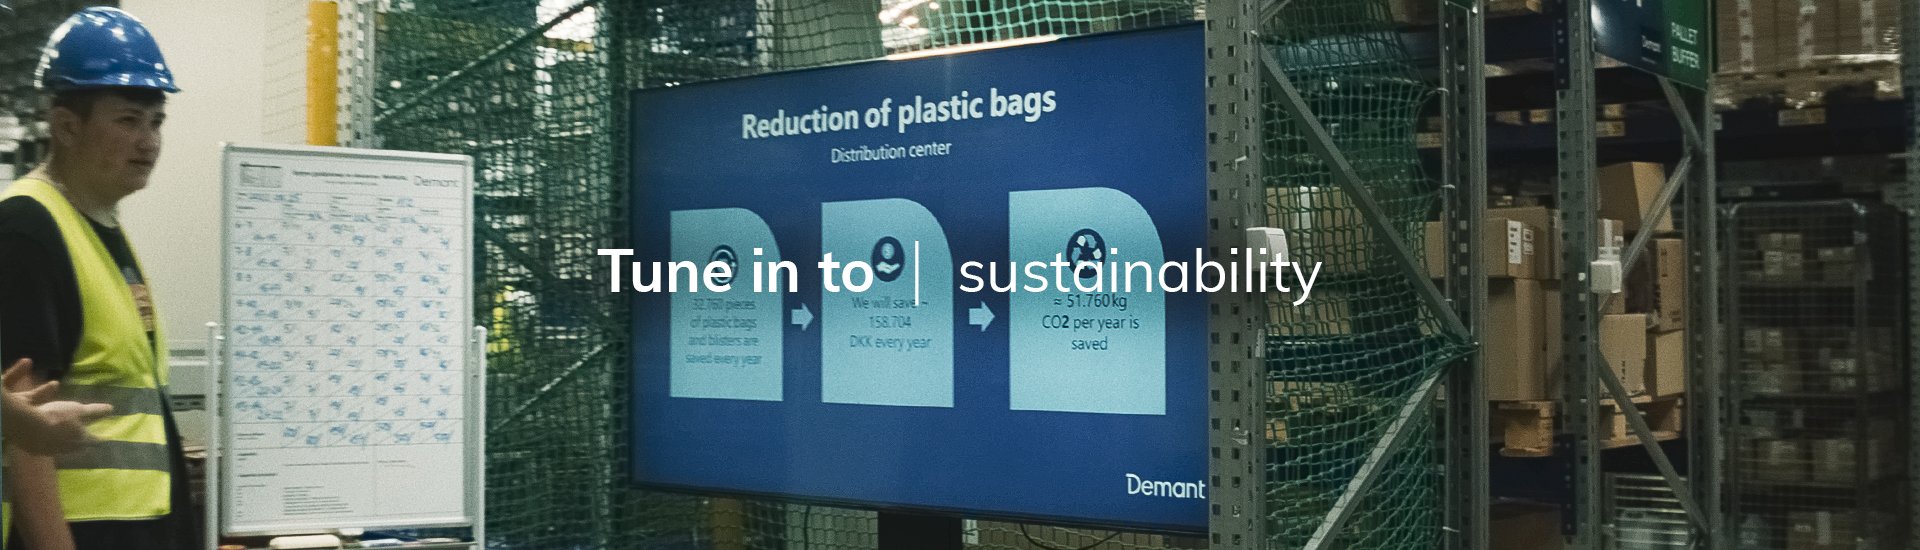 tune-in-to-sustainability_production